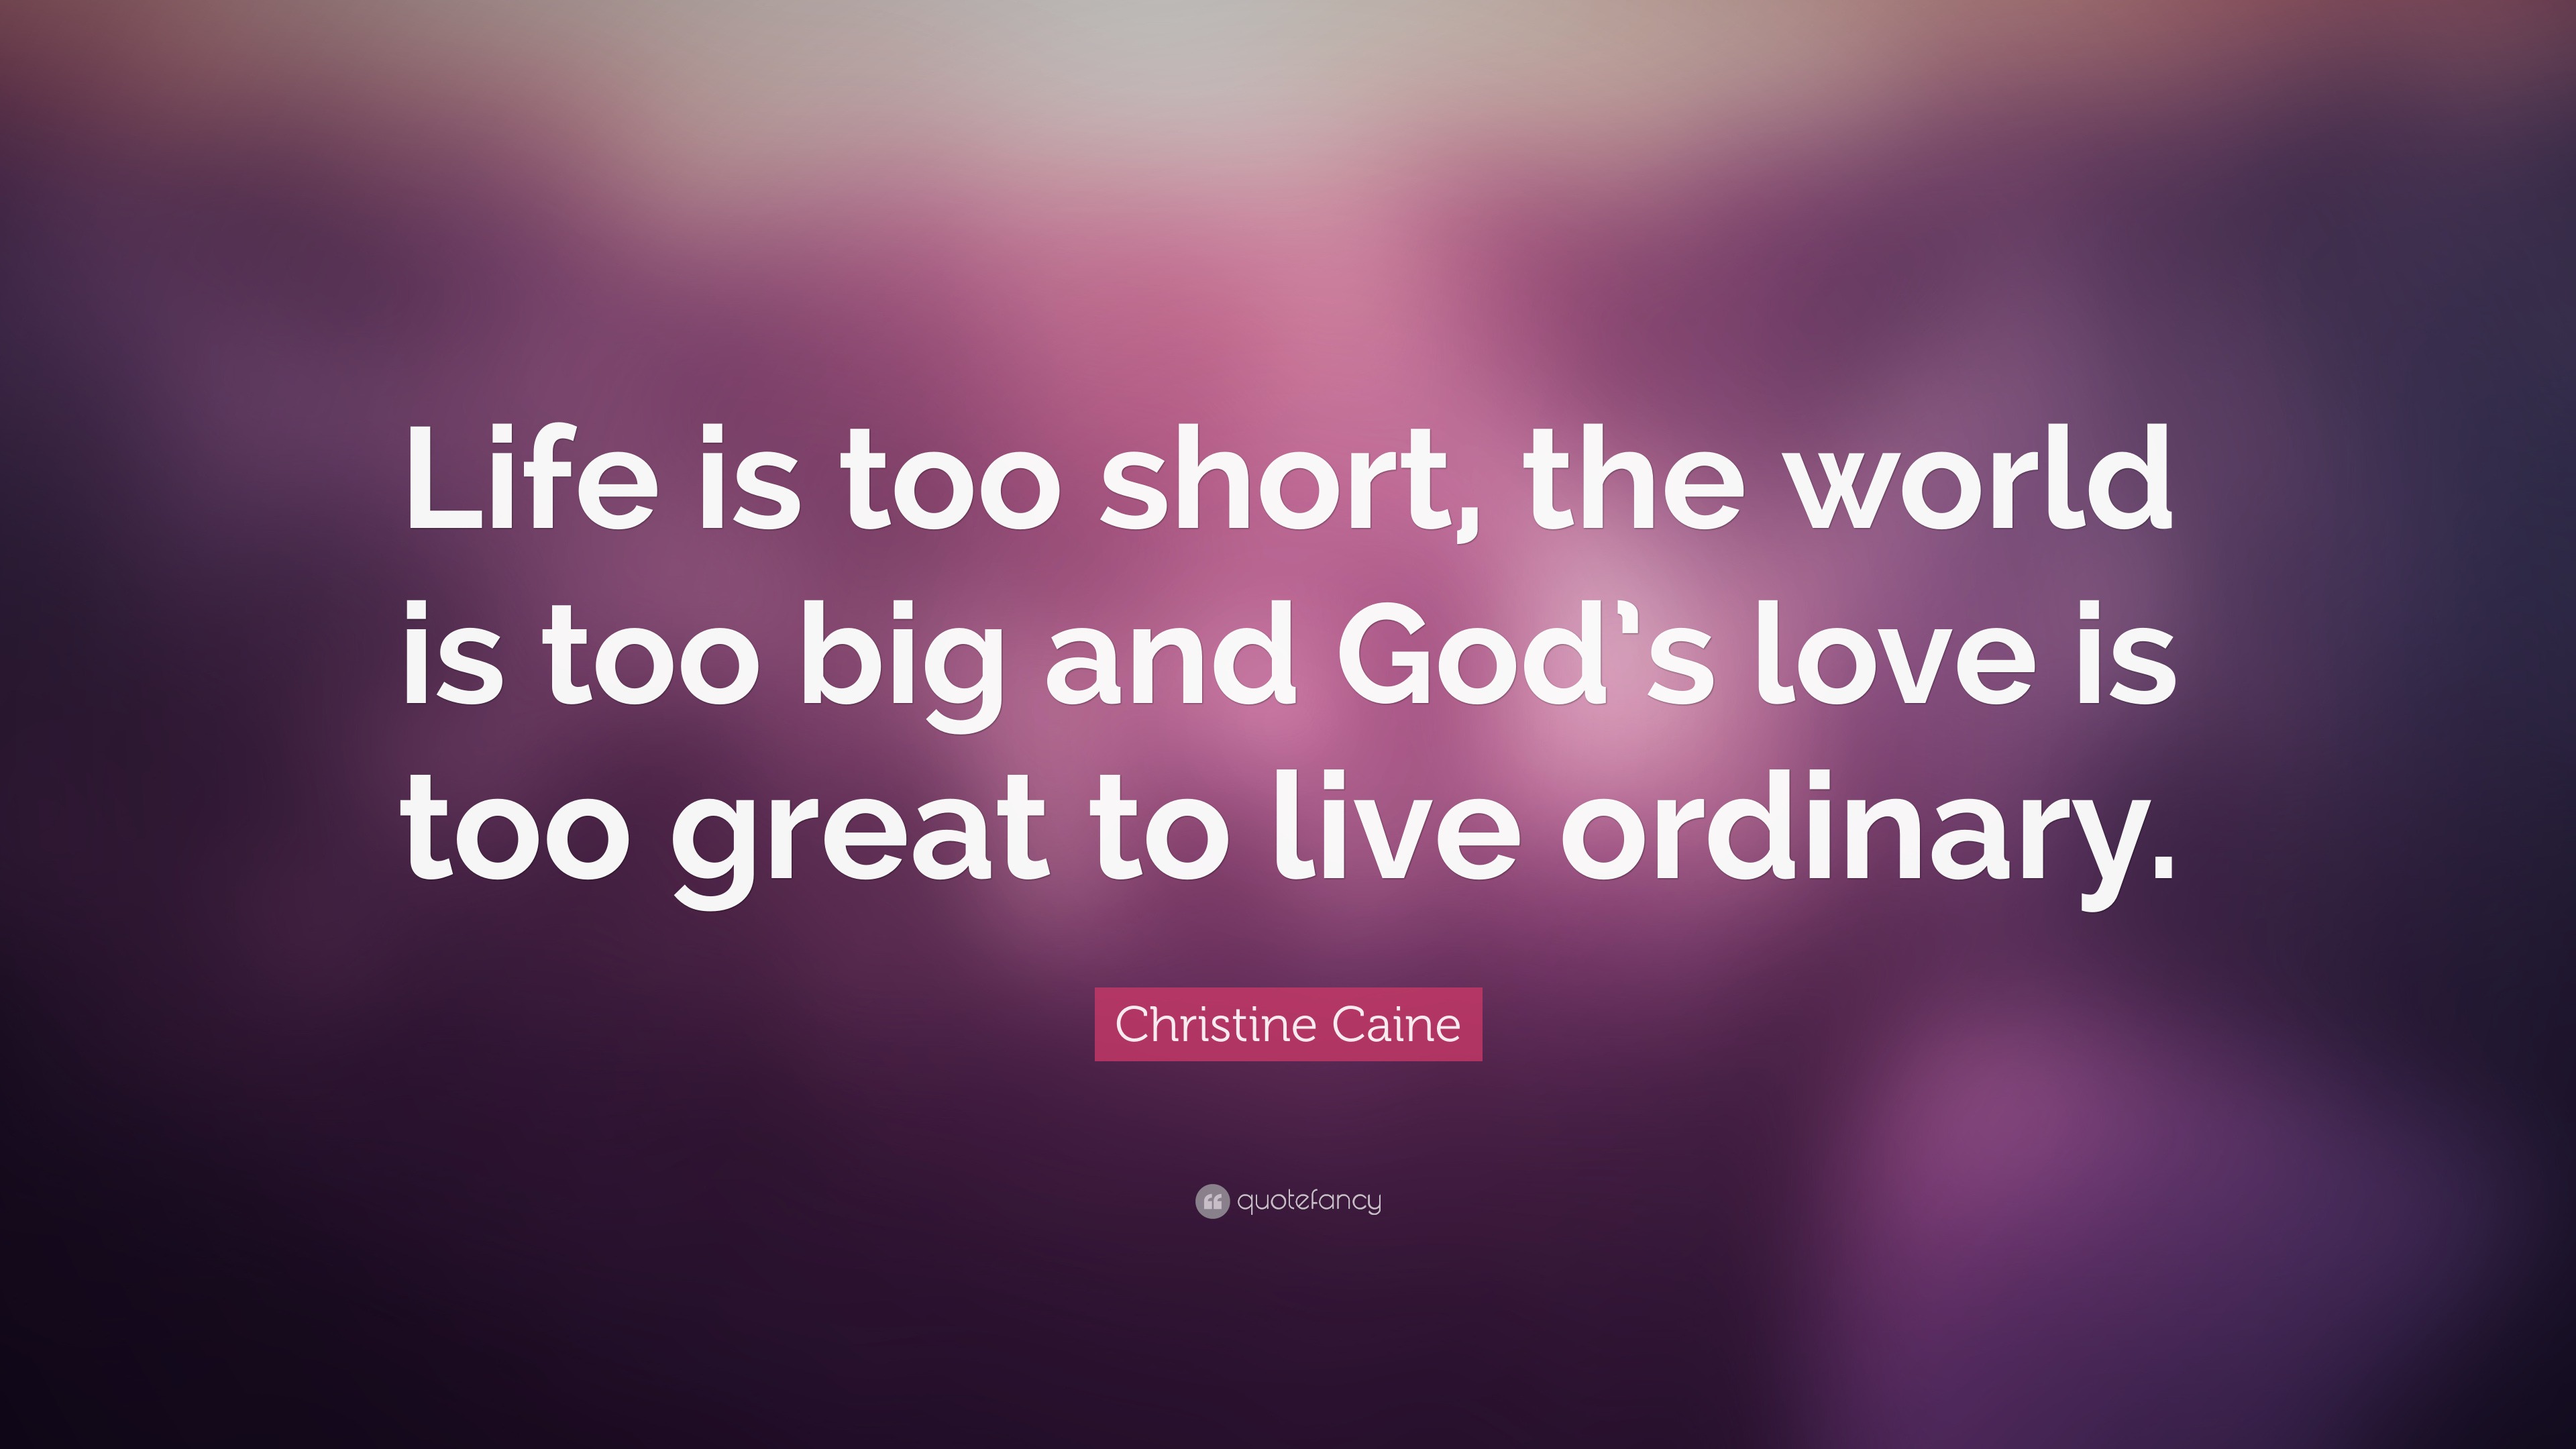 Christine Caine Quote: “Life is too short, the world is too big